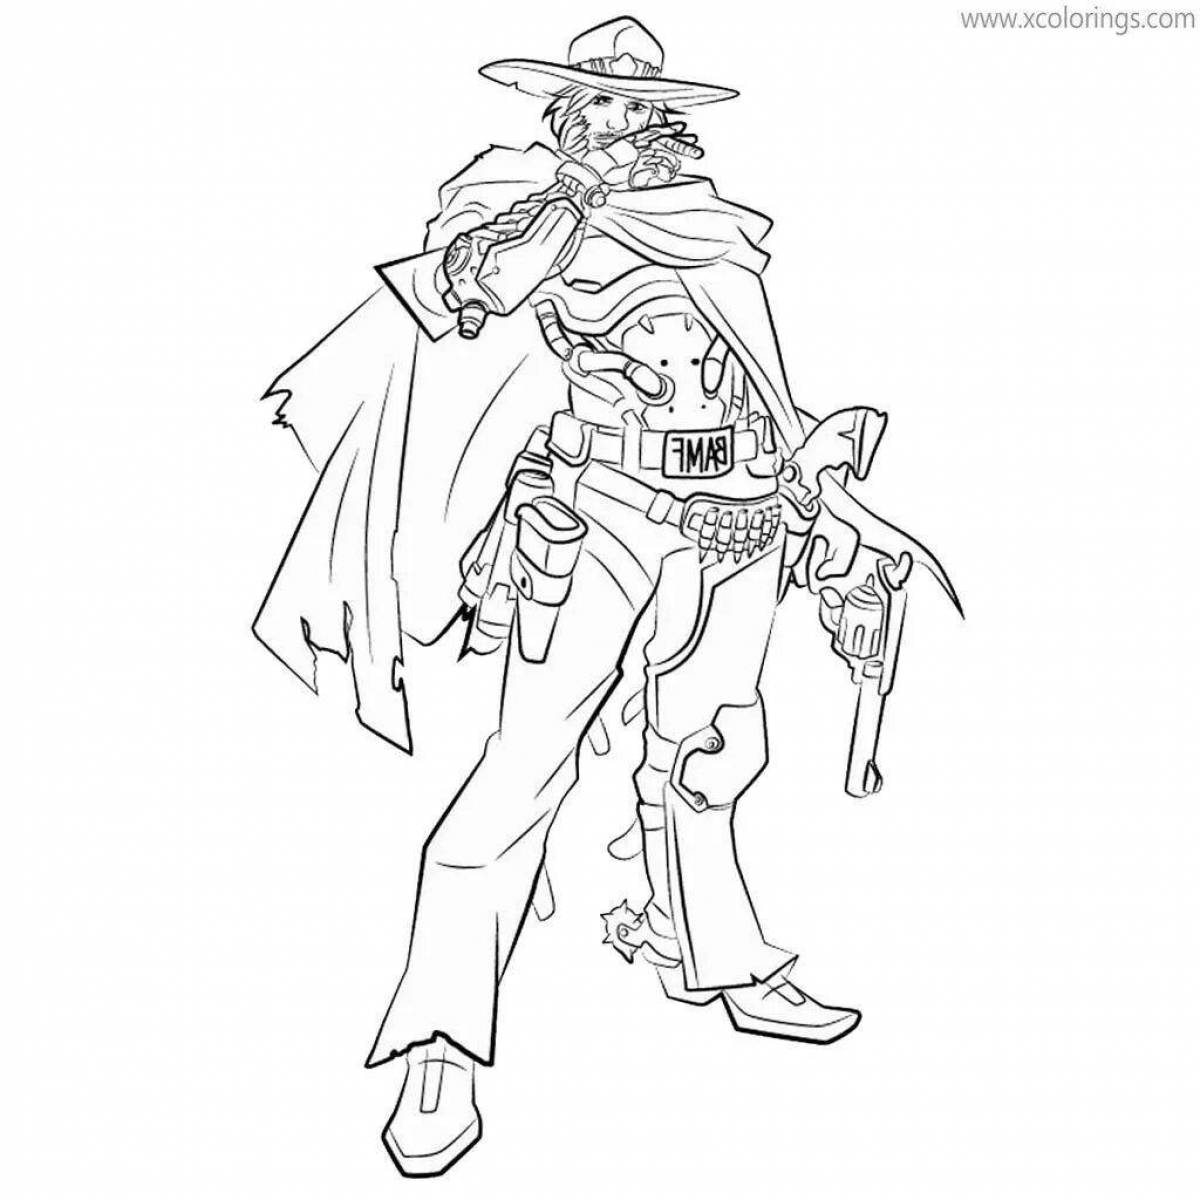 Great overwatch coloring book